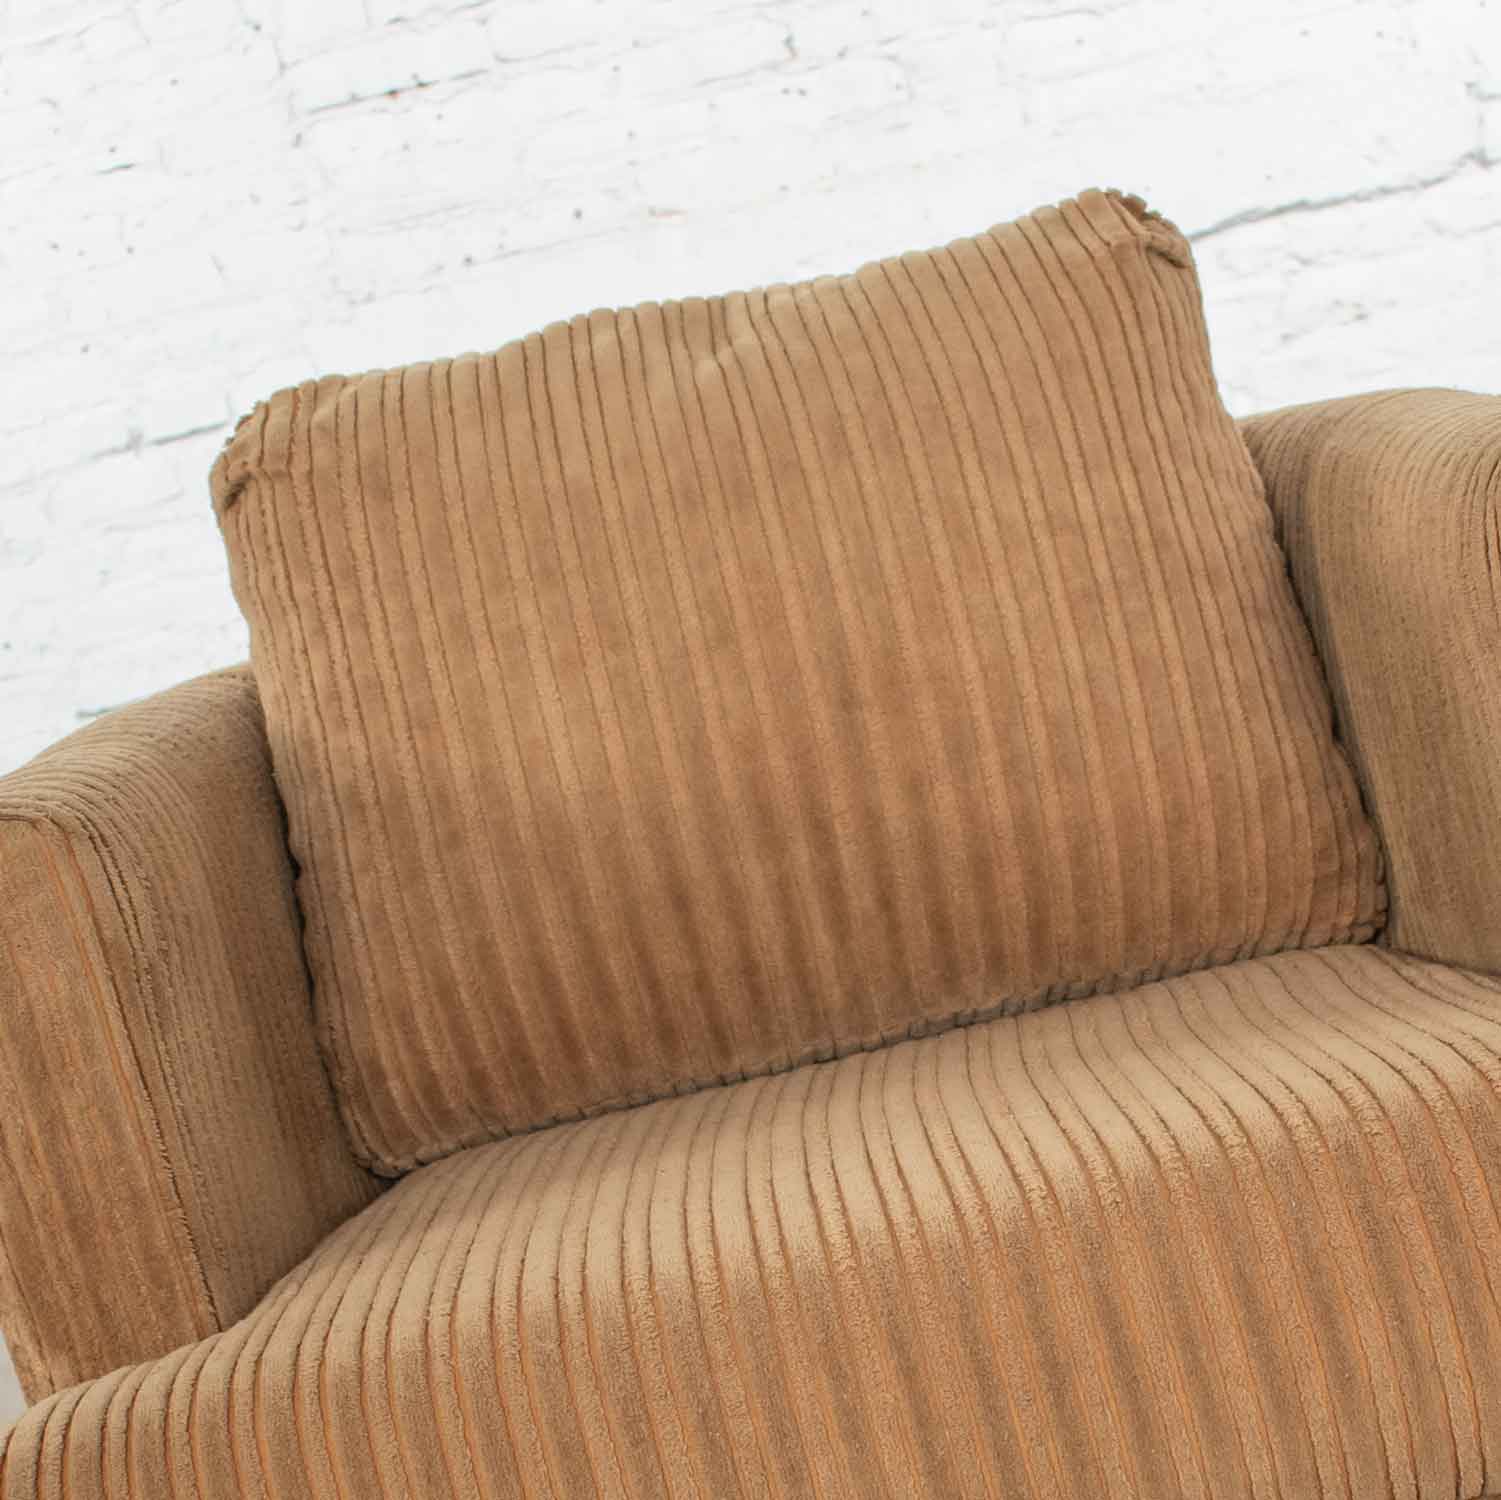 Modern Tub Lounge Chair with Camel Colored Wide Wale Corduroy Style of Harvey Probber